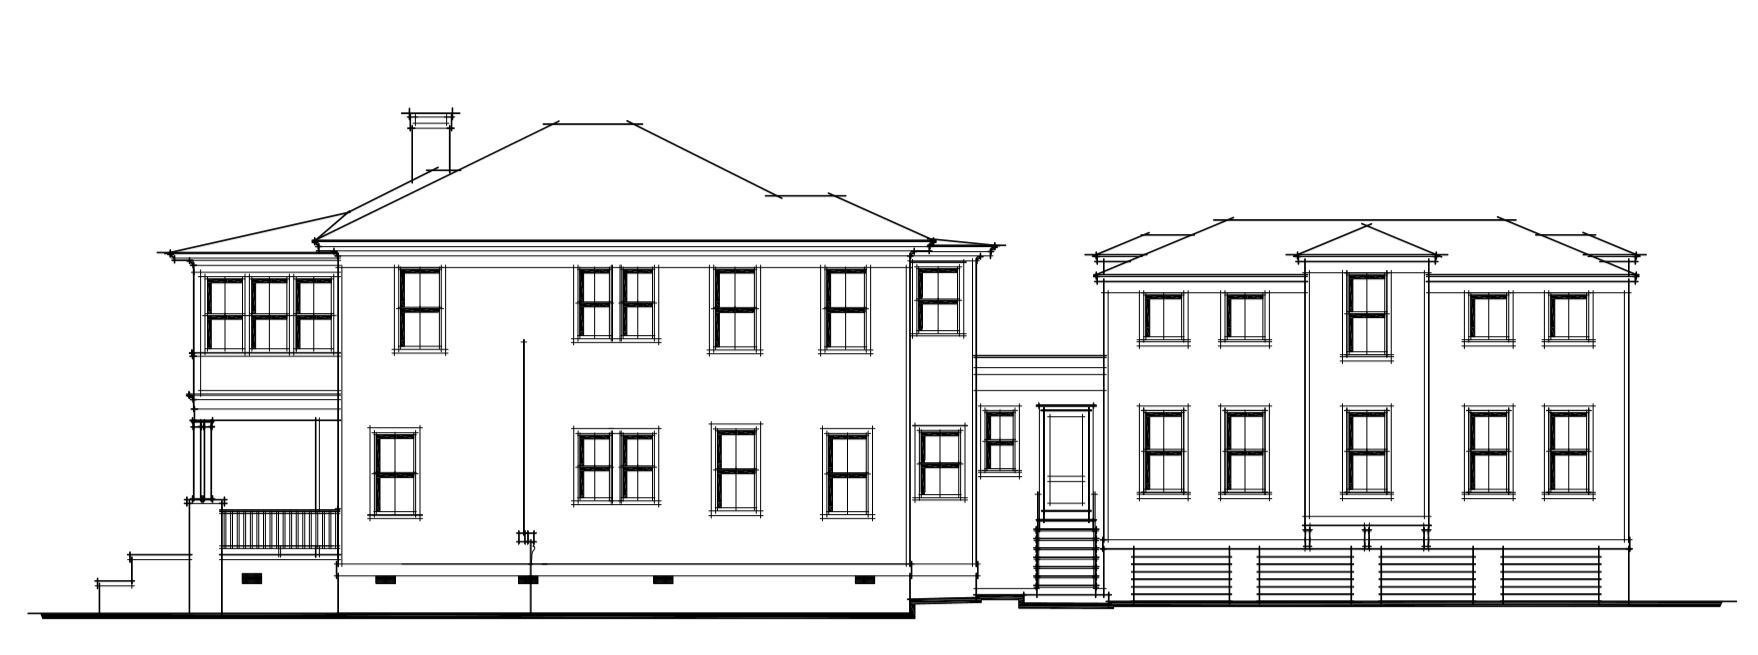 The Art of Reading and Selling an Elevation Drawing  Housing Design Matters